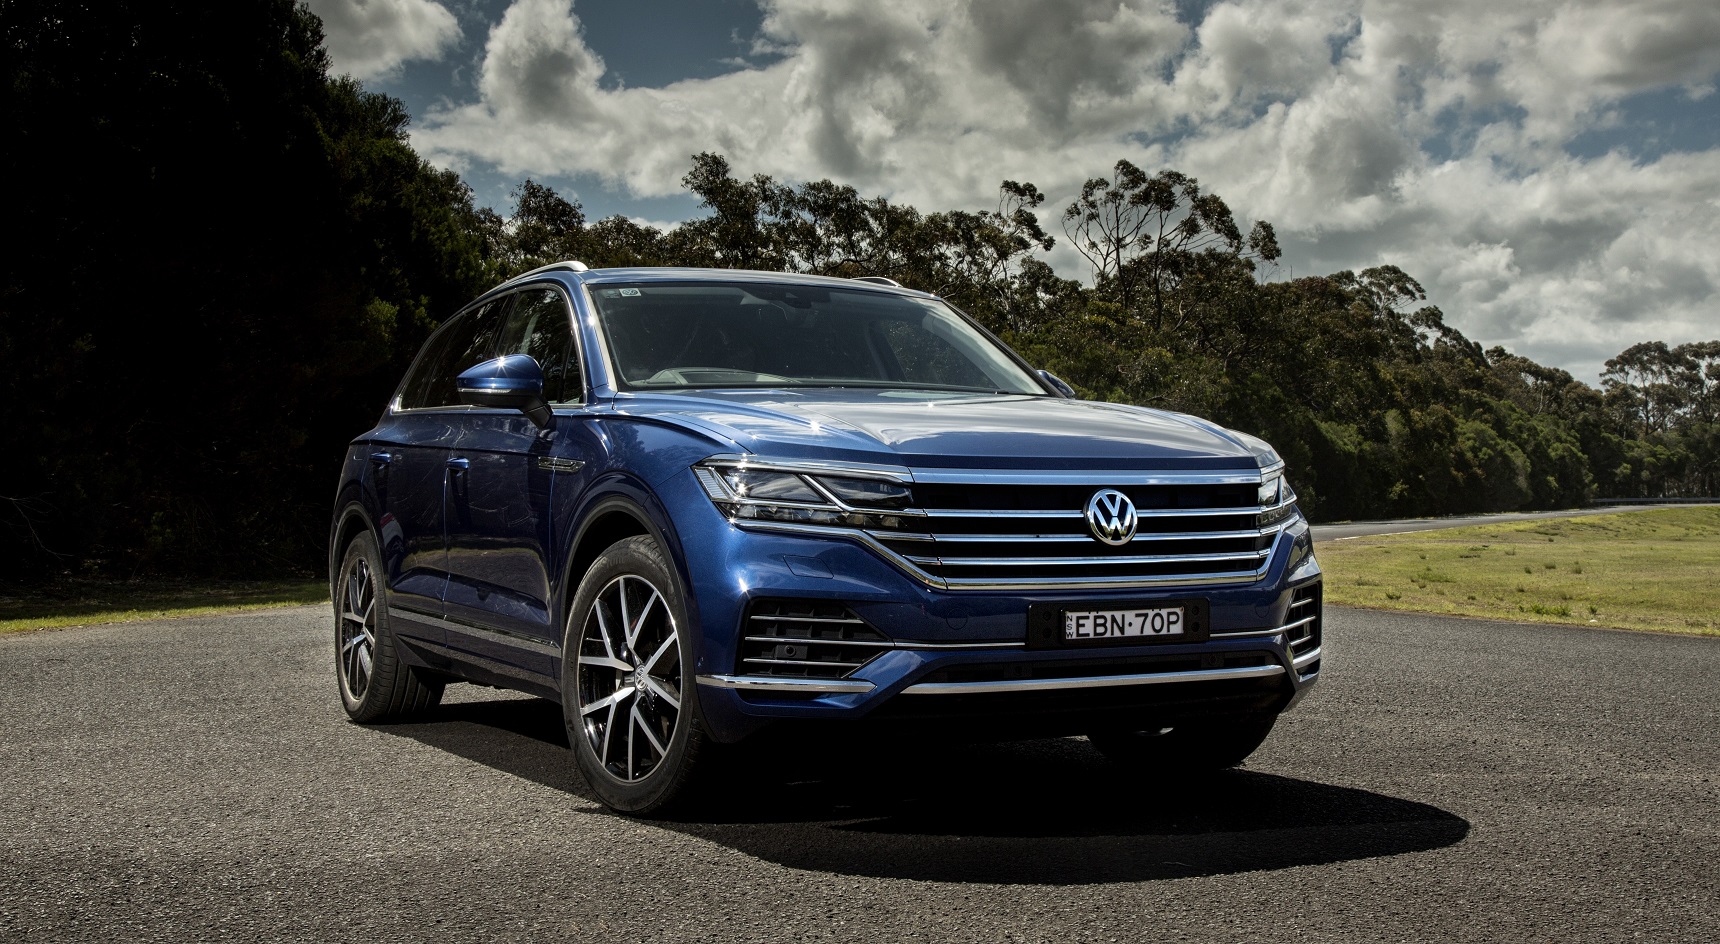 Volkswagen has provided genuine competition in the premium SUV market.